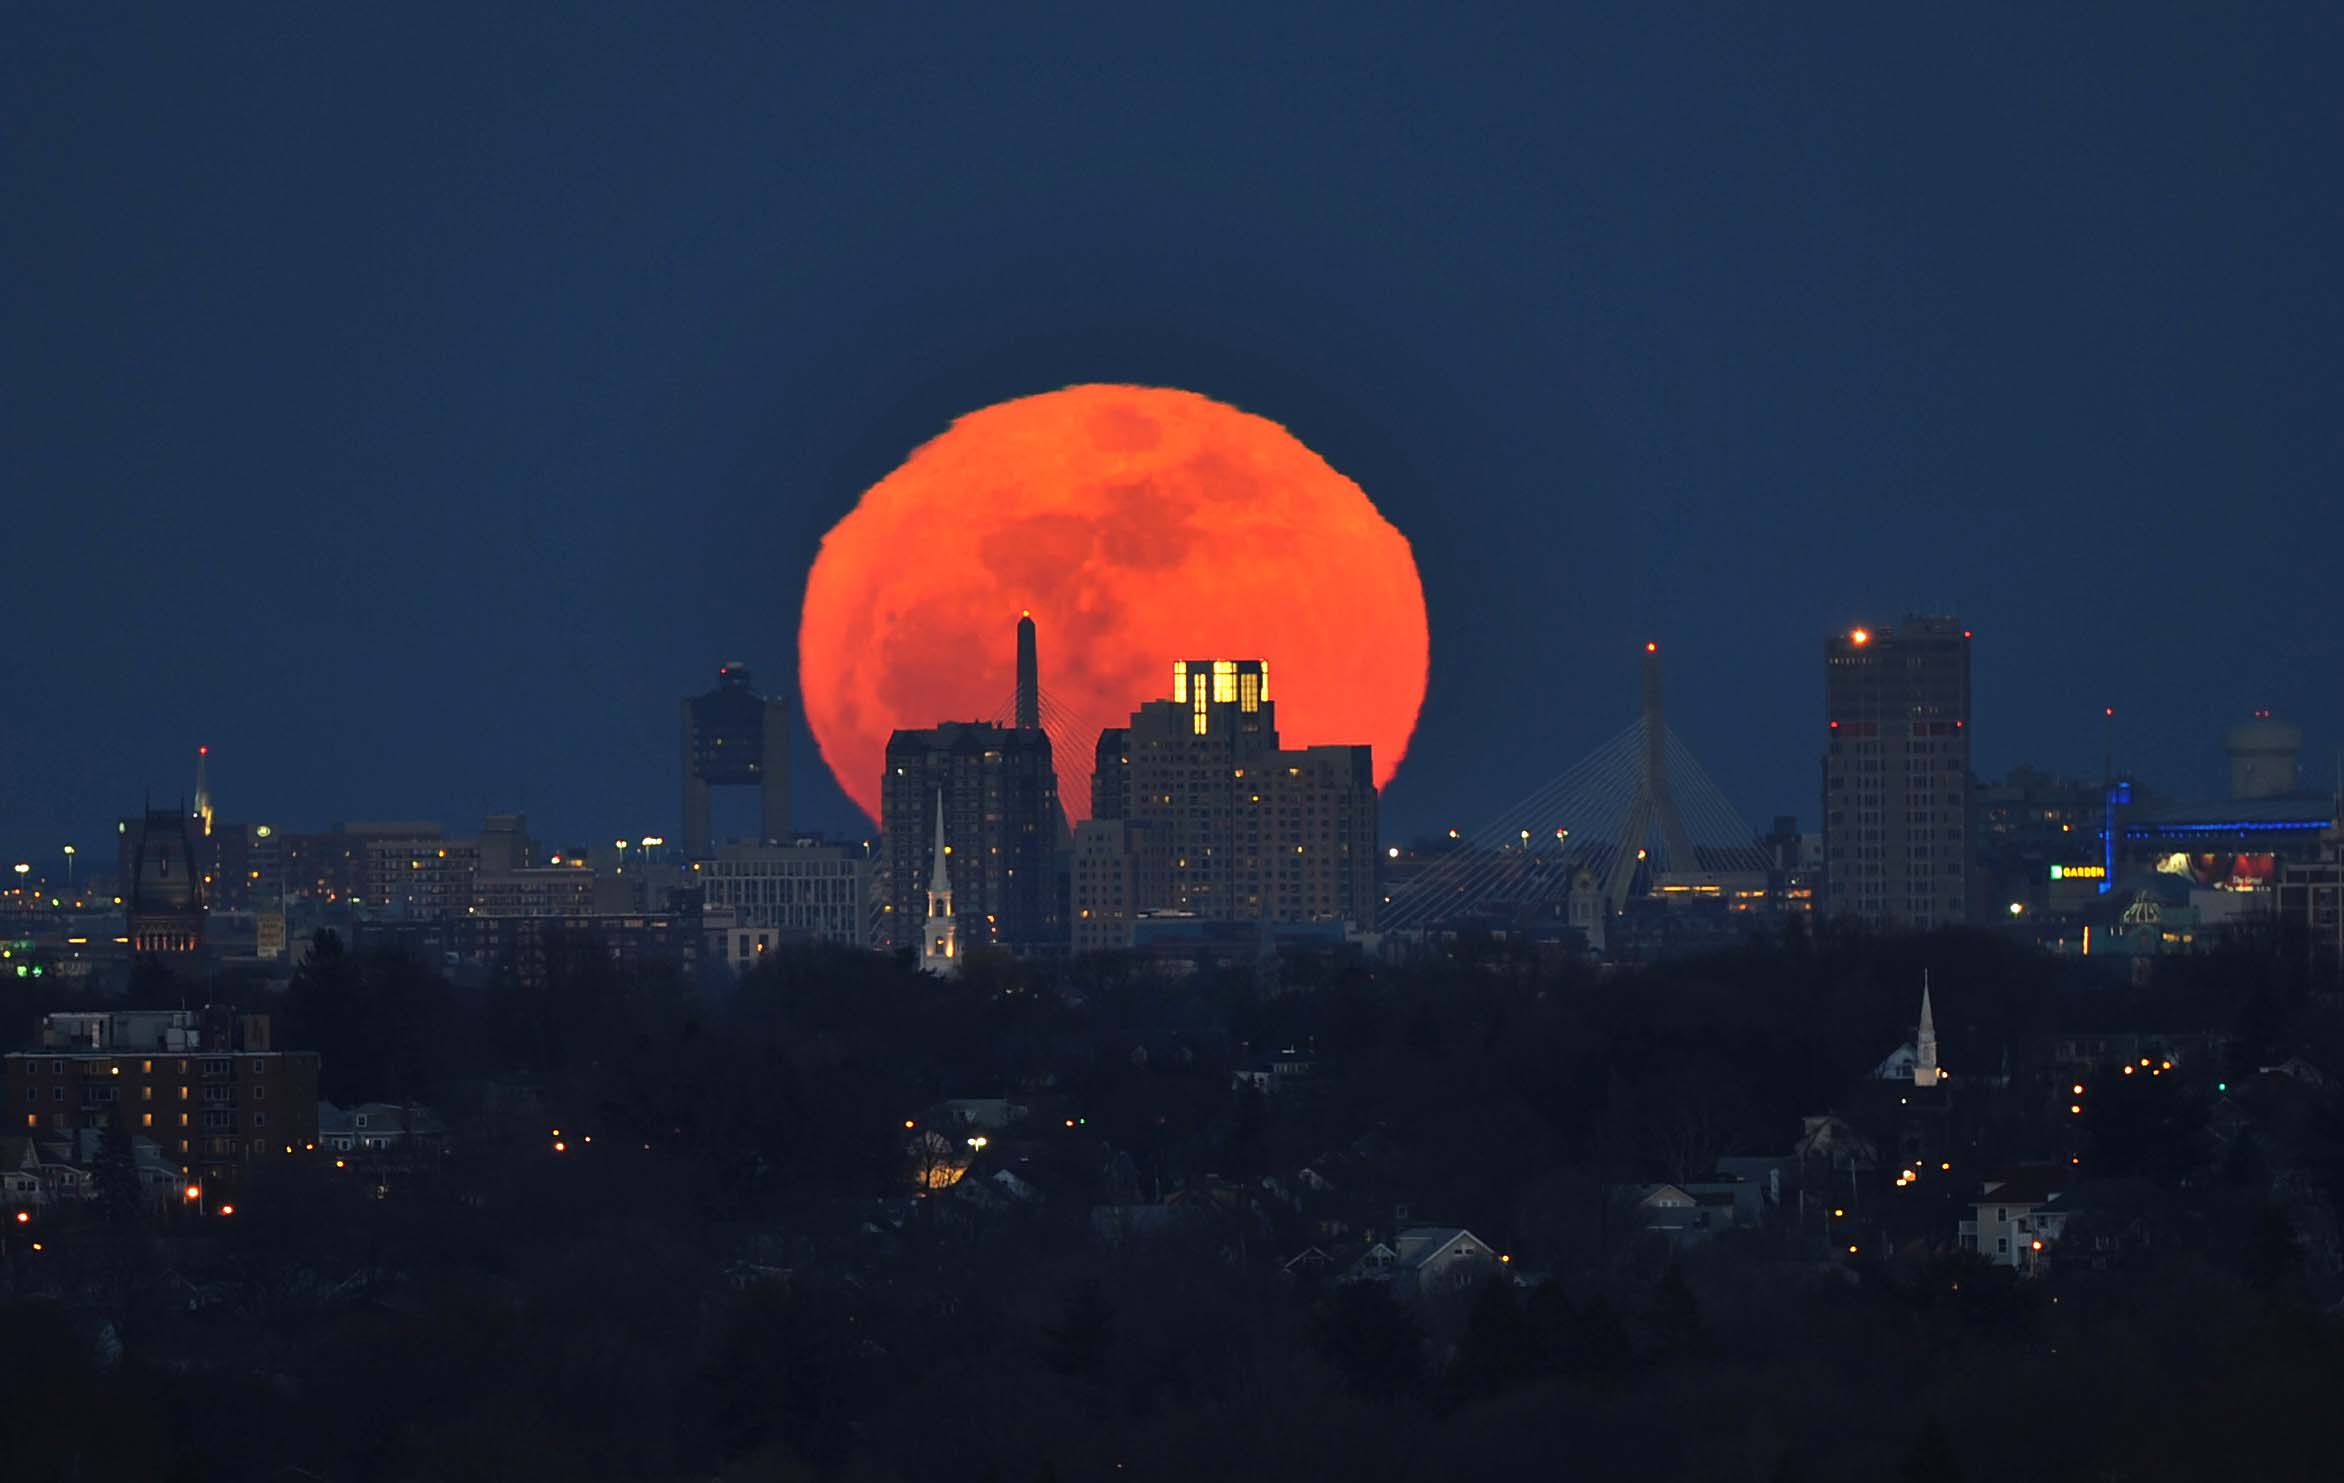 Moonrise on March 19, 2014